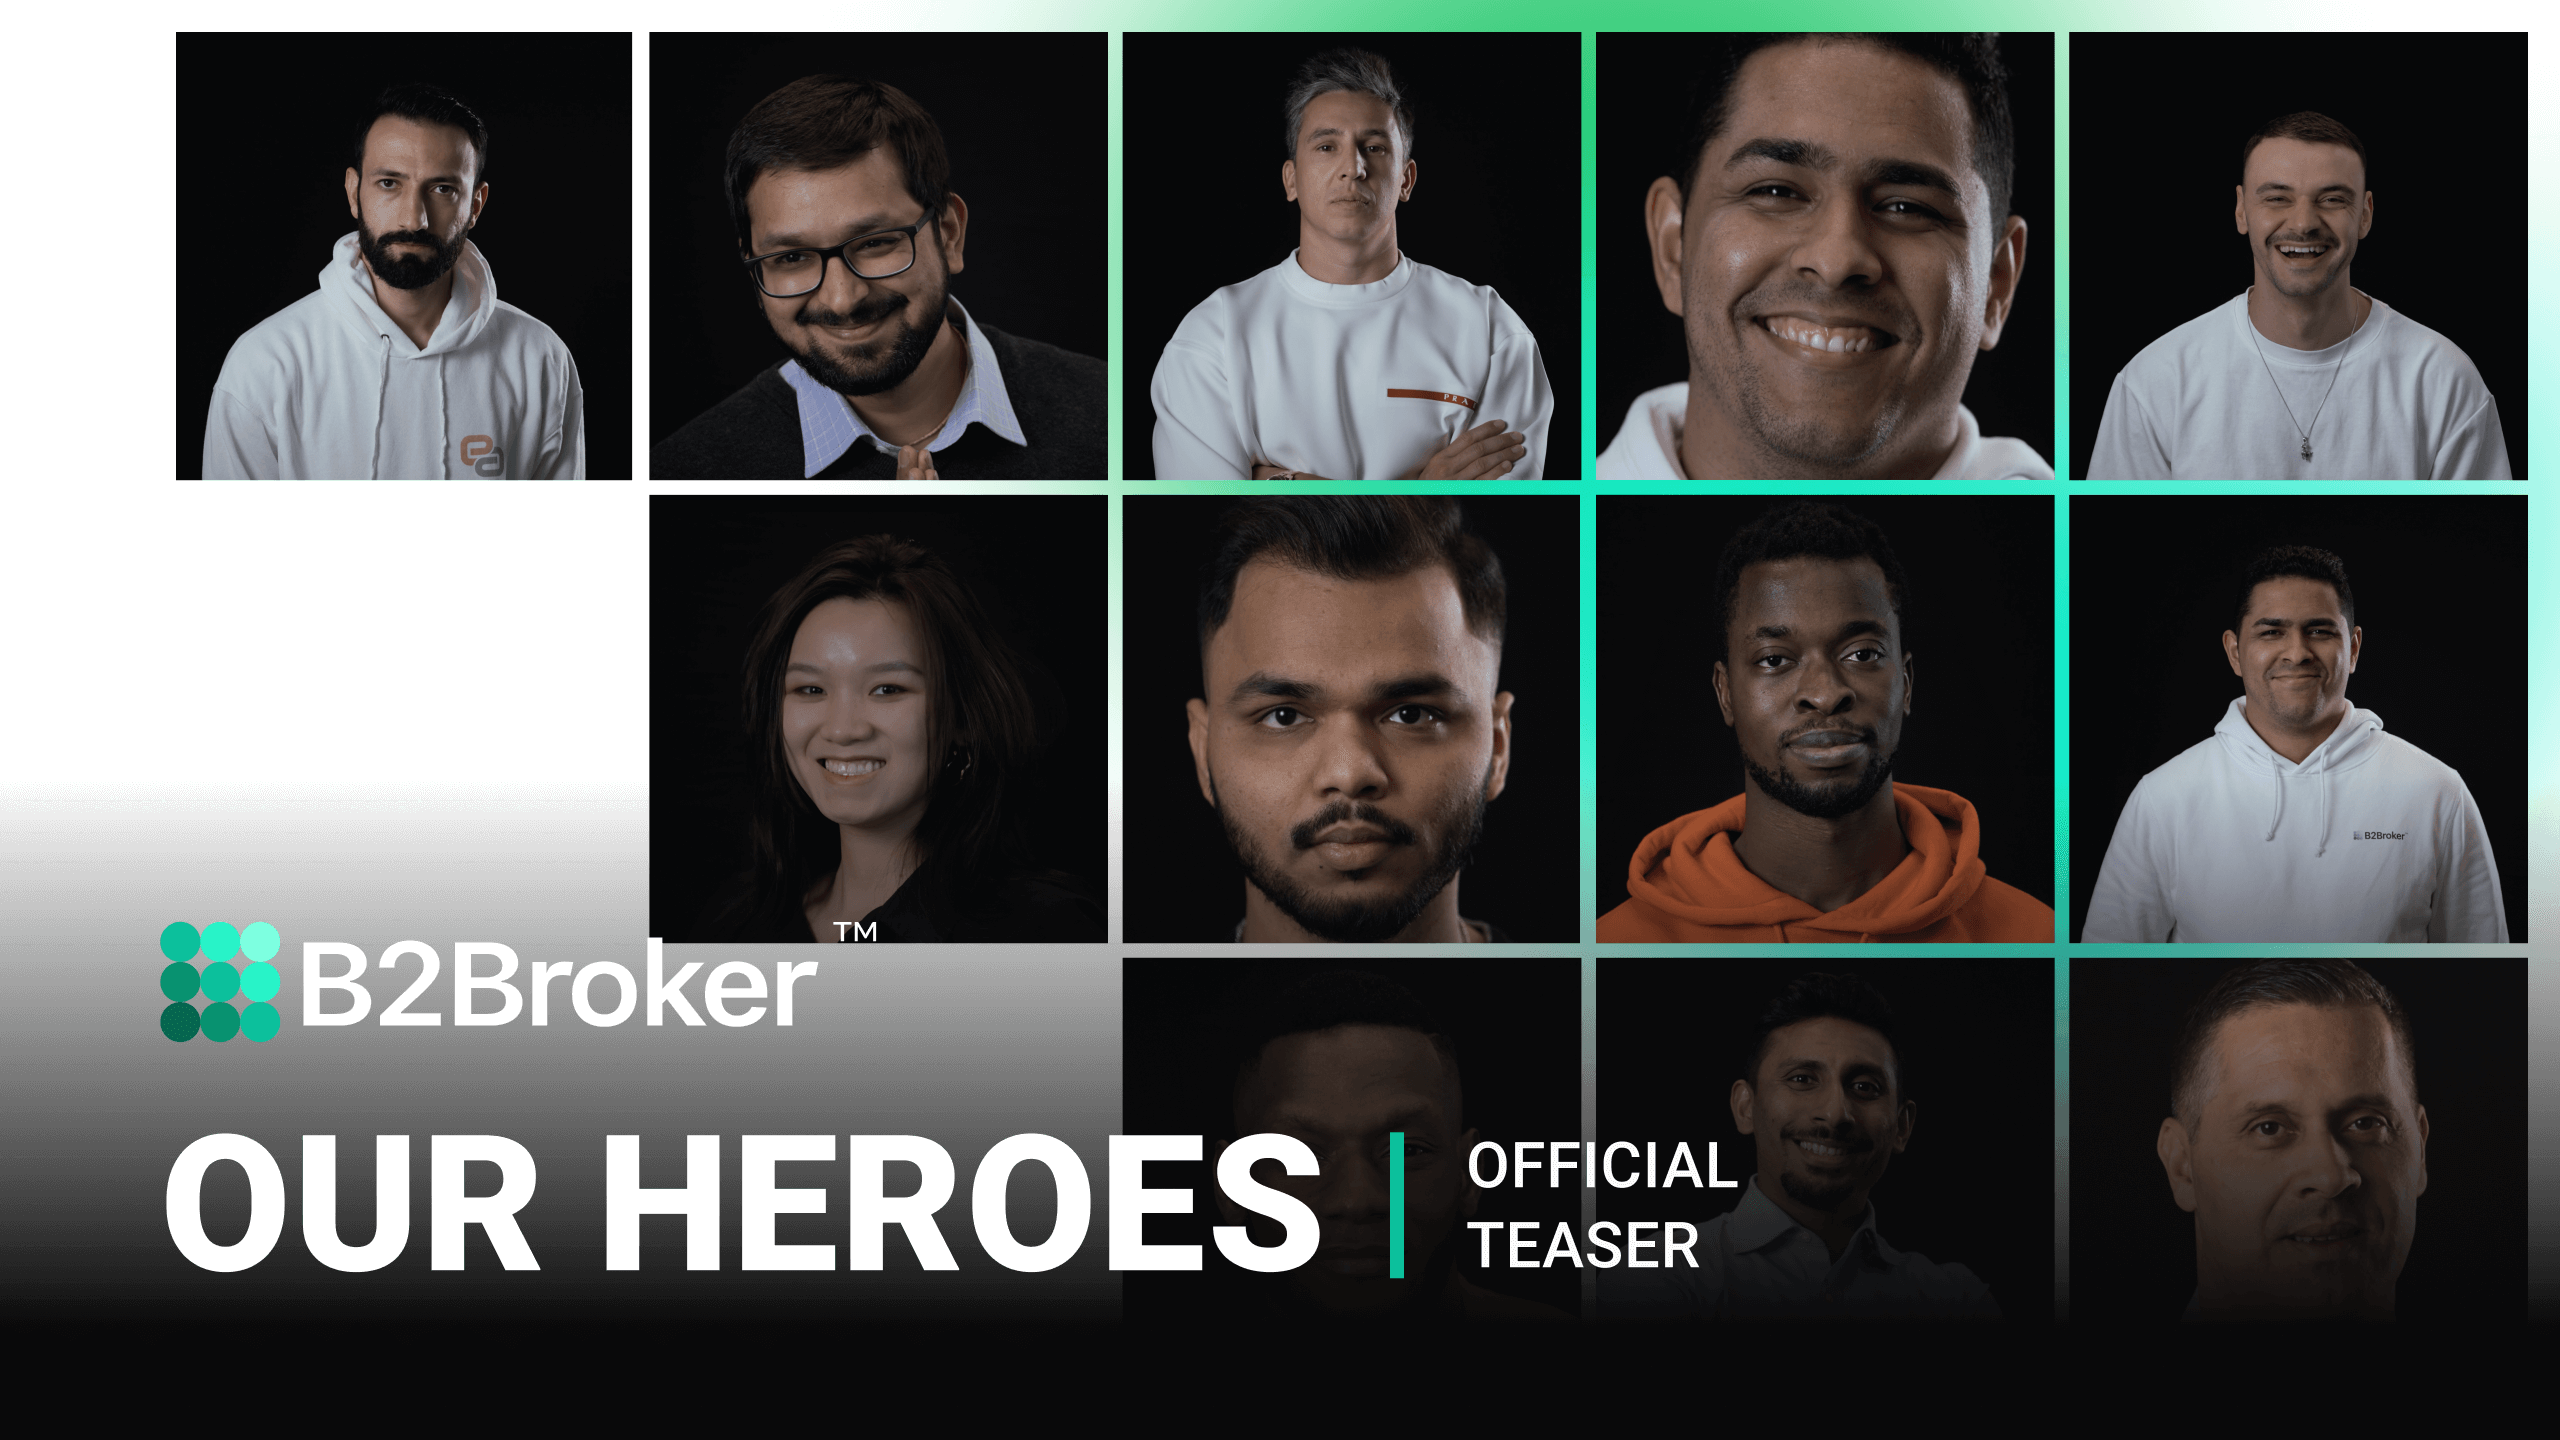 Our Heroes | New exciting series about the global B2Broker team